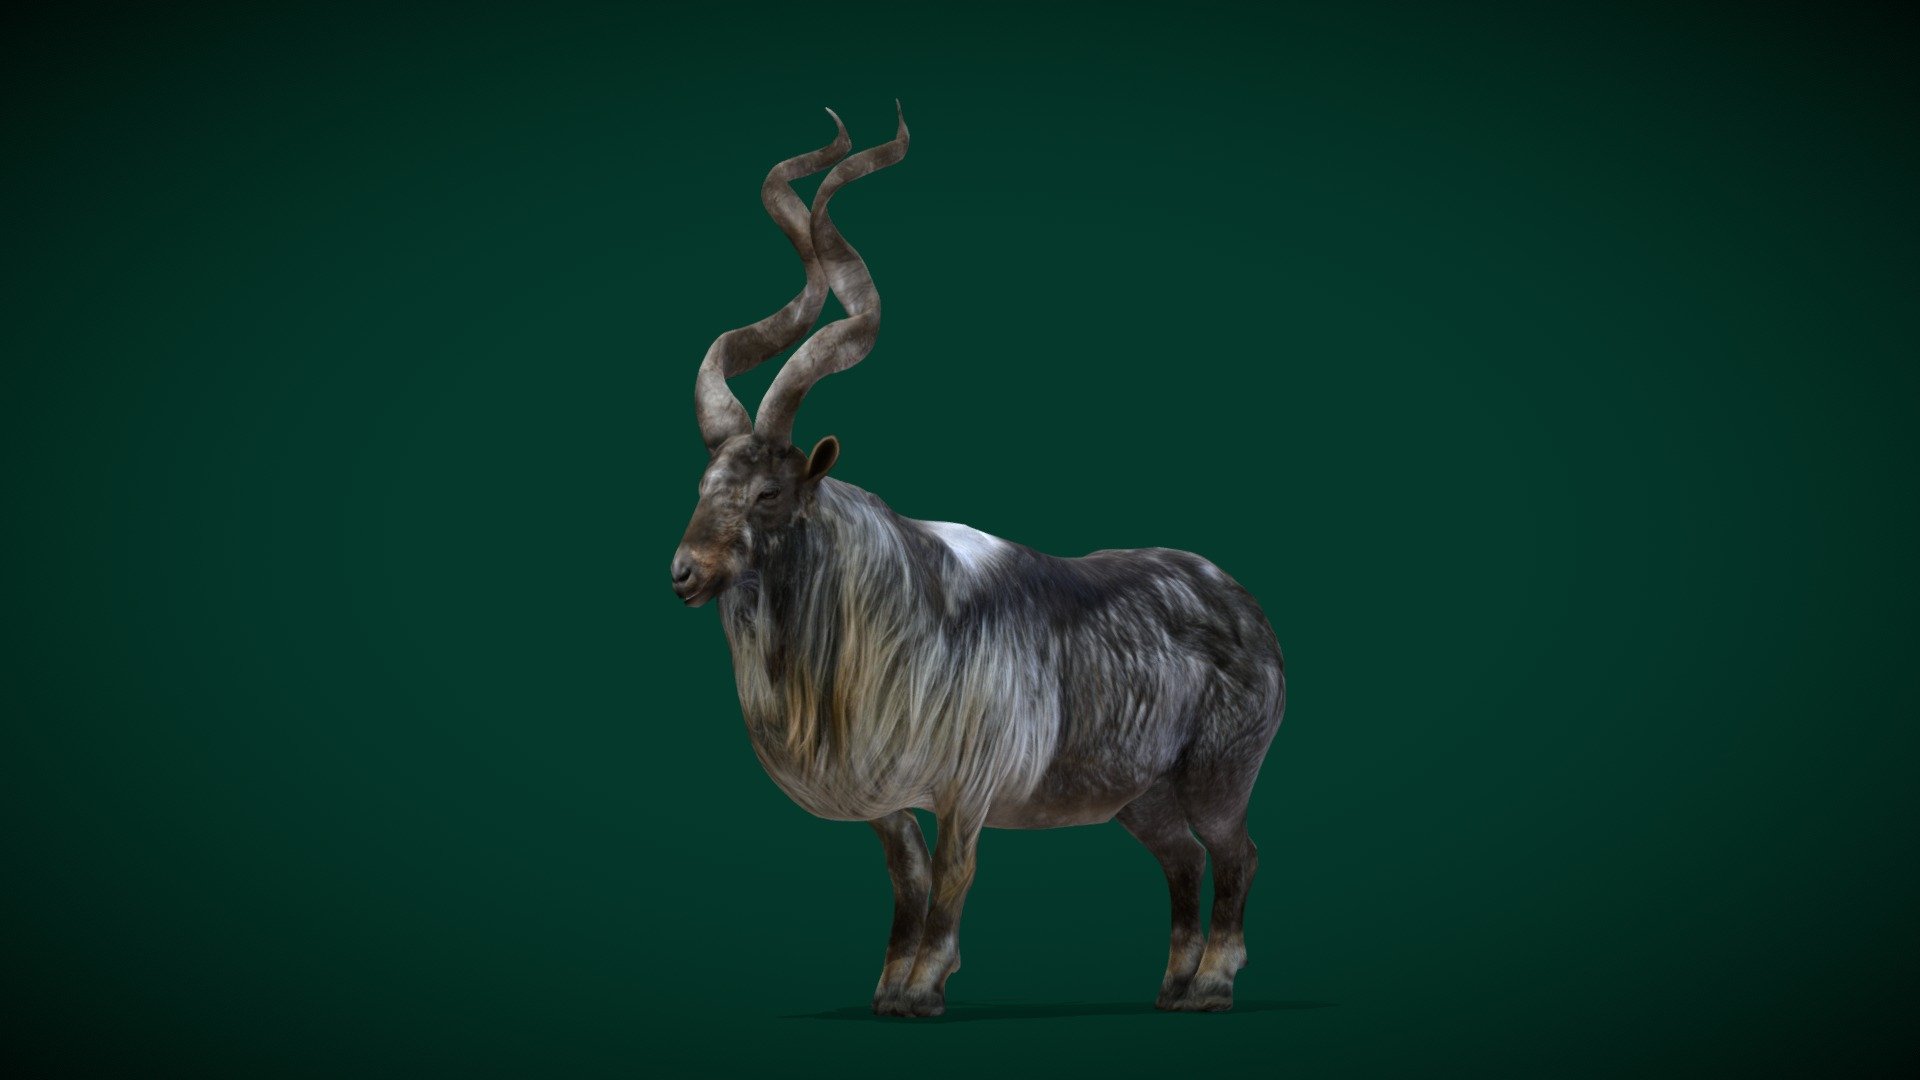 Markhor Large Wild Goat (large wild Capra )Engandered

Capra falconeri Animal Mammal Animalia (Pakistan)Bovidae

1 Draw Calls

Midpoly 

Game Ready Asset

Subdivision Surface Ready

8- Animations

4K PBR Textures Material

Unreal FBX (Unreal 4,5 Plus)

Unity FBX

Blend File 3.6.5 LTS

USDZ File (AR Ready). Real Scale Dimension (Xcode ,Reality Composer, Keynote Ready)

Textures Files

GLB File (Unreal 5.1 Plus Native Support)


Gltf File ( Spark AR, Lens Studio(SnapChat) , Effector(Tiktok) , Spline, Play Canvas,Omiverse ) Compatible




Triangles -13196  



Faces -6516

Edges -13128

Vertices -6626

Diffuse, Metallic, Roughness , Normal Map ,Specular Map,AO,

The markhor is a large wild Capra species native to South Asia and Central Asia, mainly within Pakistan, the Karakoram range, parts of Afghanistan, and the Himalayas. It is listed on the IUCN Red List as Near Threatened since 2015 3d model